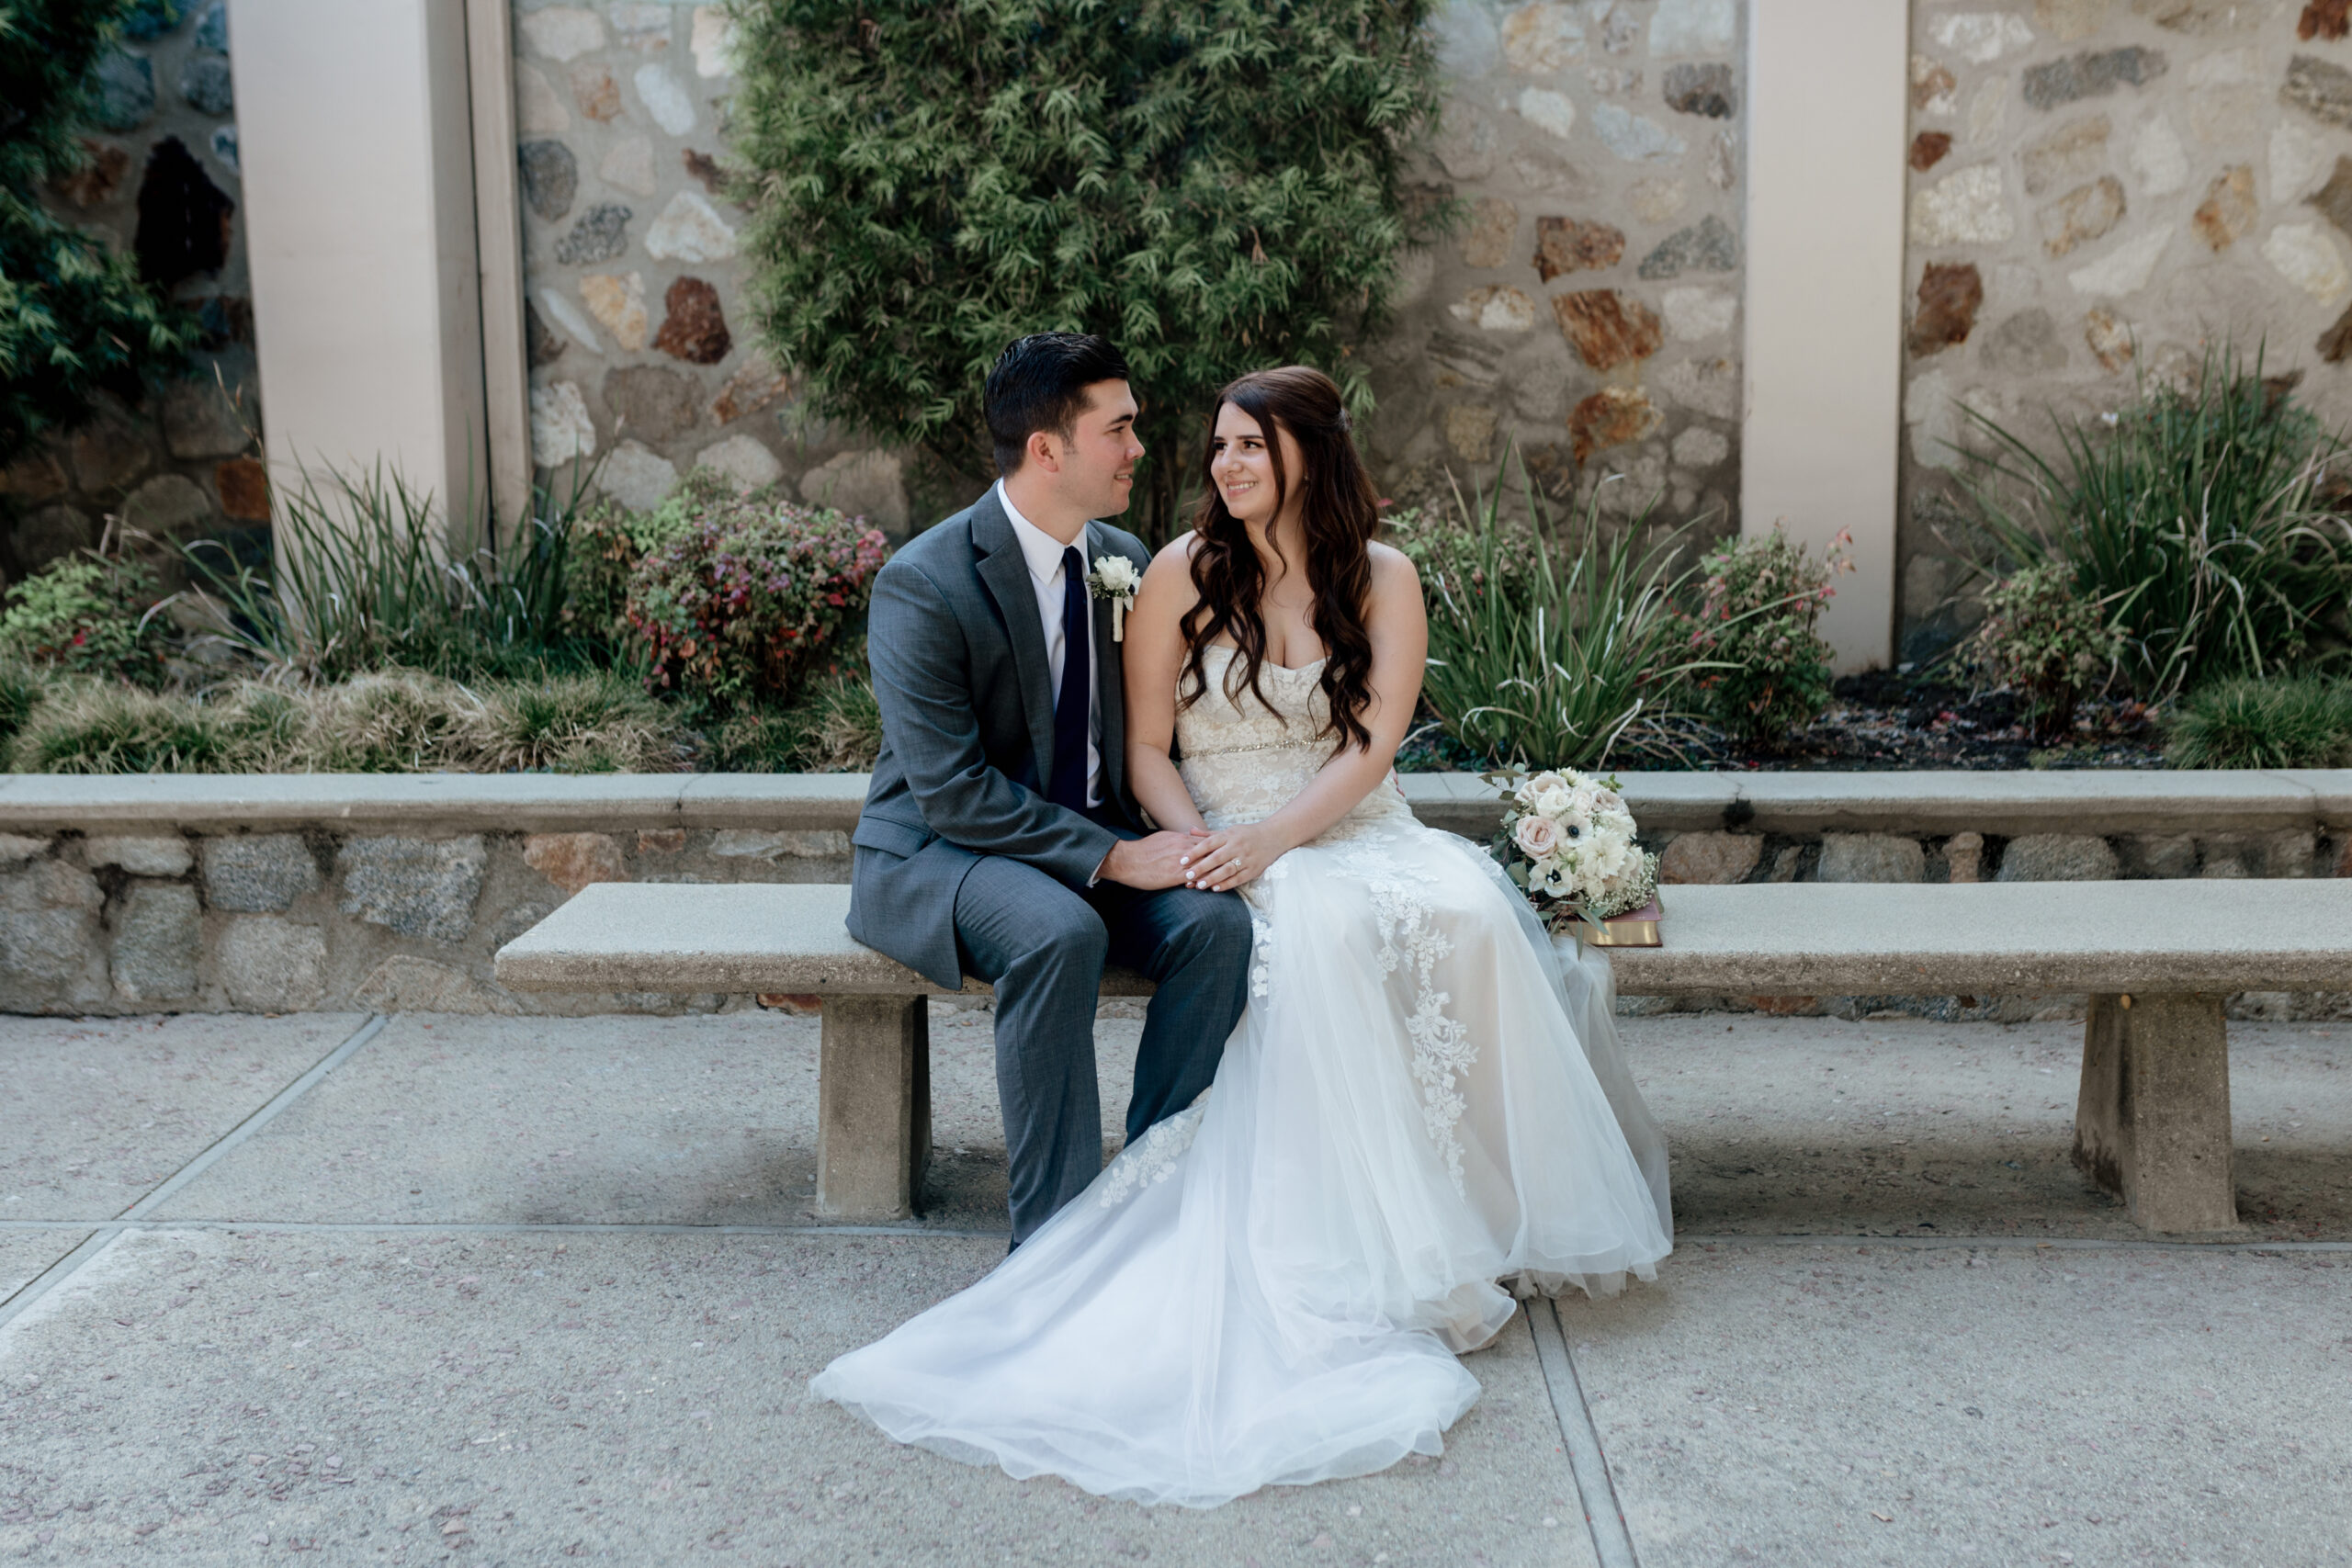 Two newlyweds, looking at each other and sitting on a bench in front of green plants